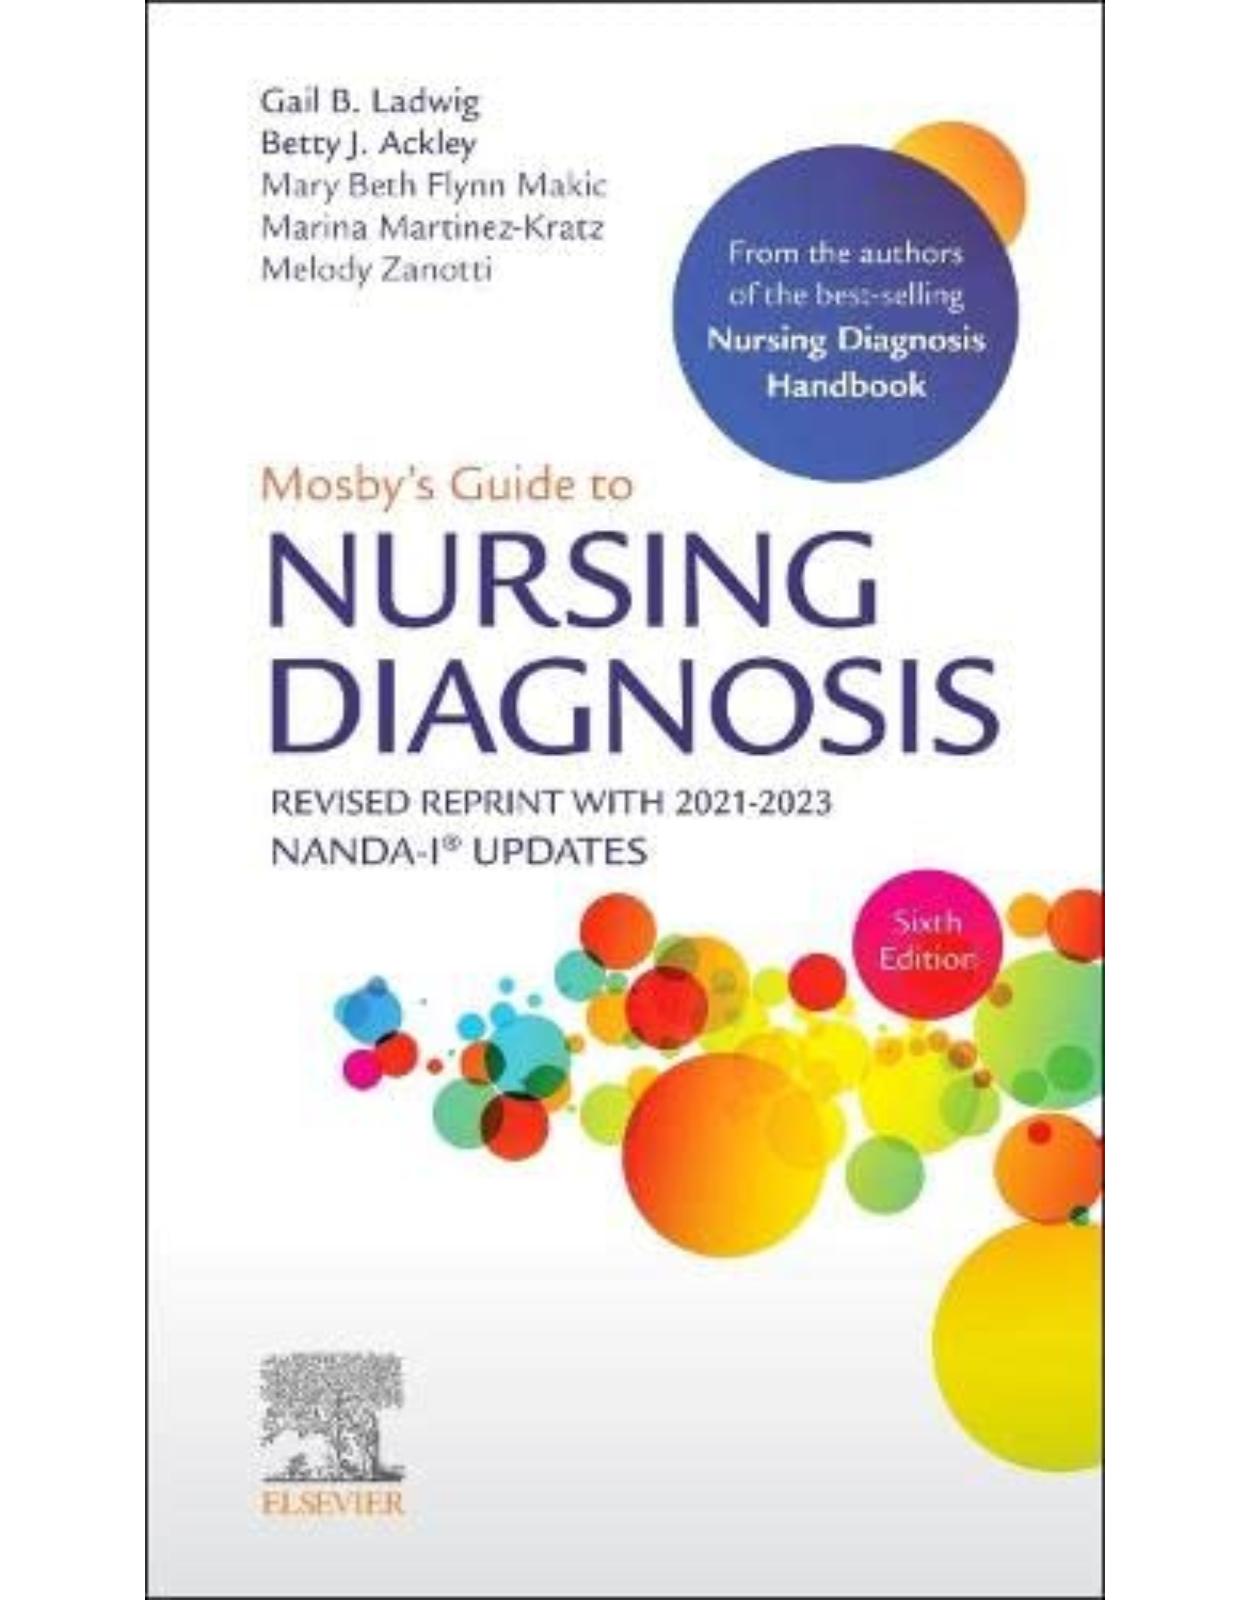 Mosby's Guide to Nursing Diagnosis, 6th Edition Revised Reprint with 2021-2023 